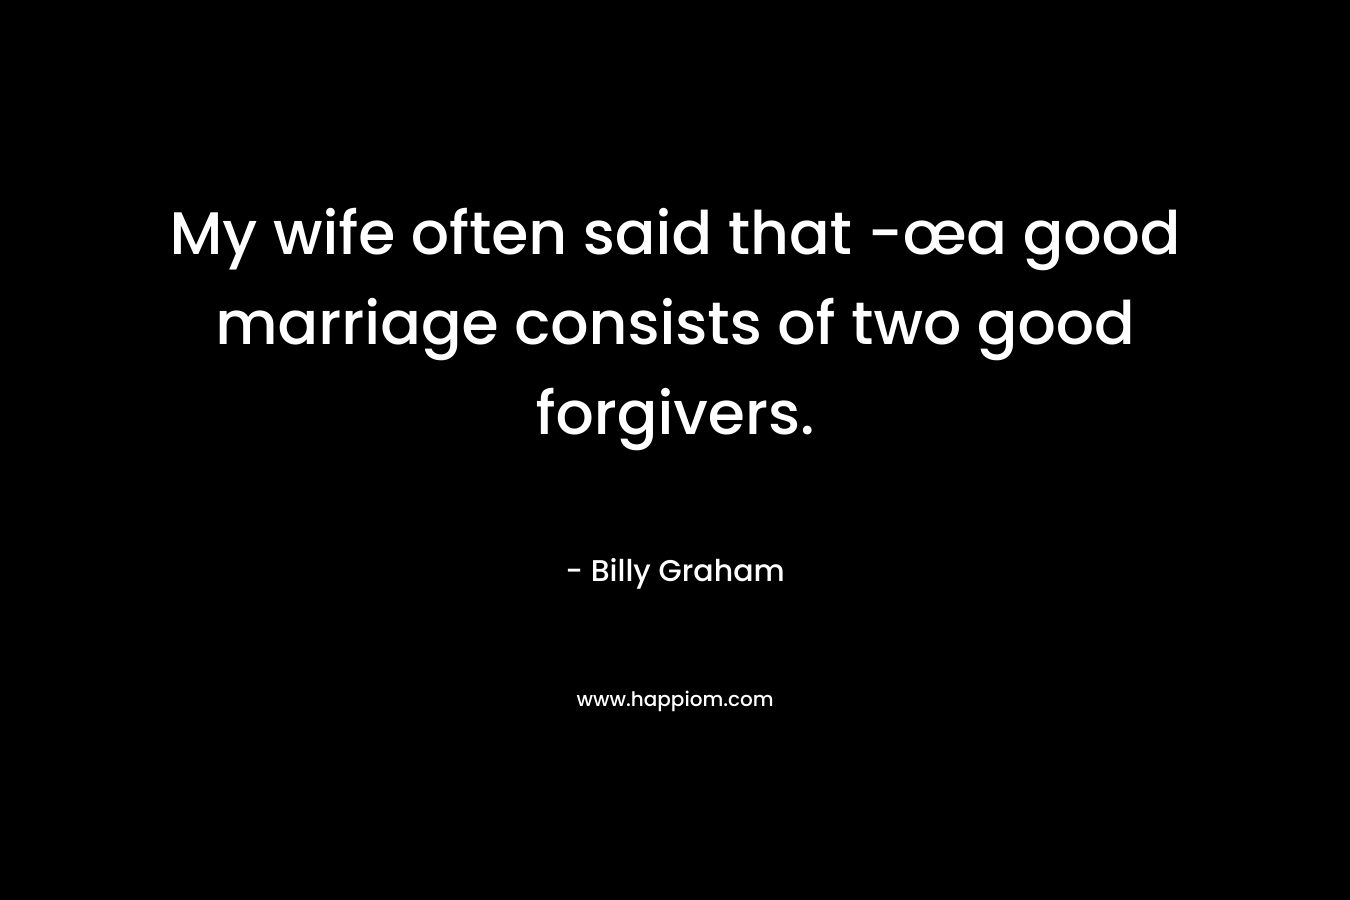 My wife often said that -œa good marriage consists of two good forgivers.